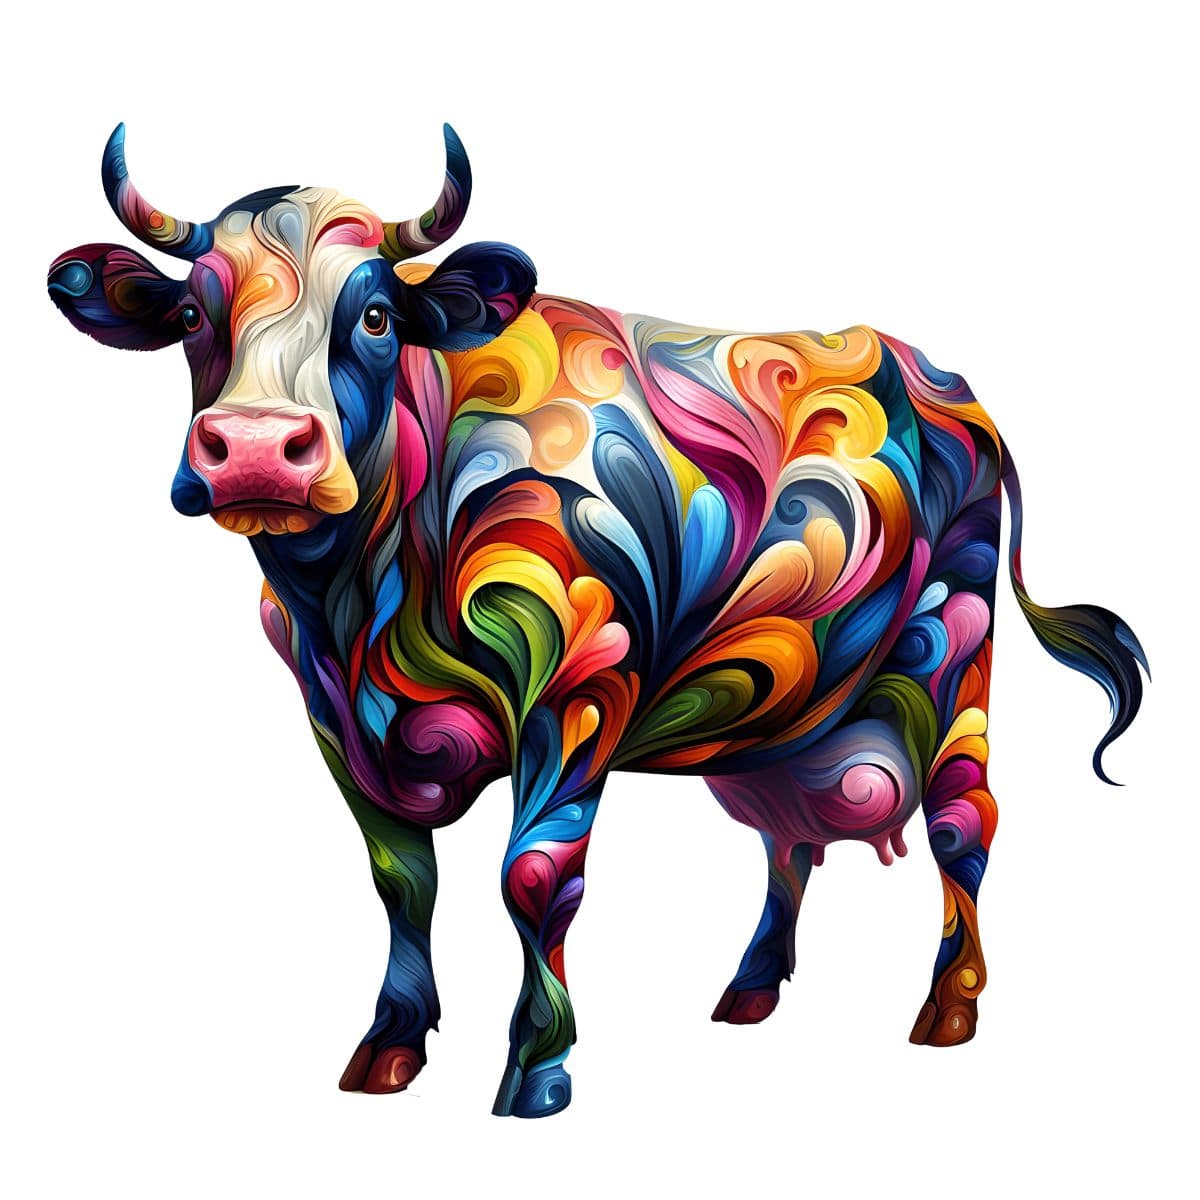 Animal Jigsaw Puzzle > Wooden Jigsaw Puzzle > Jigsaw Puzzle A5 Cow - Jigsaw Puzzle